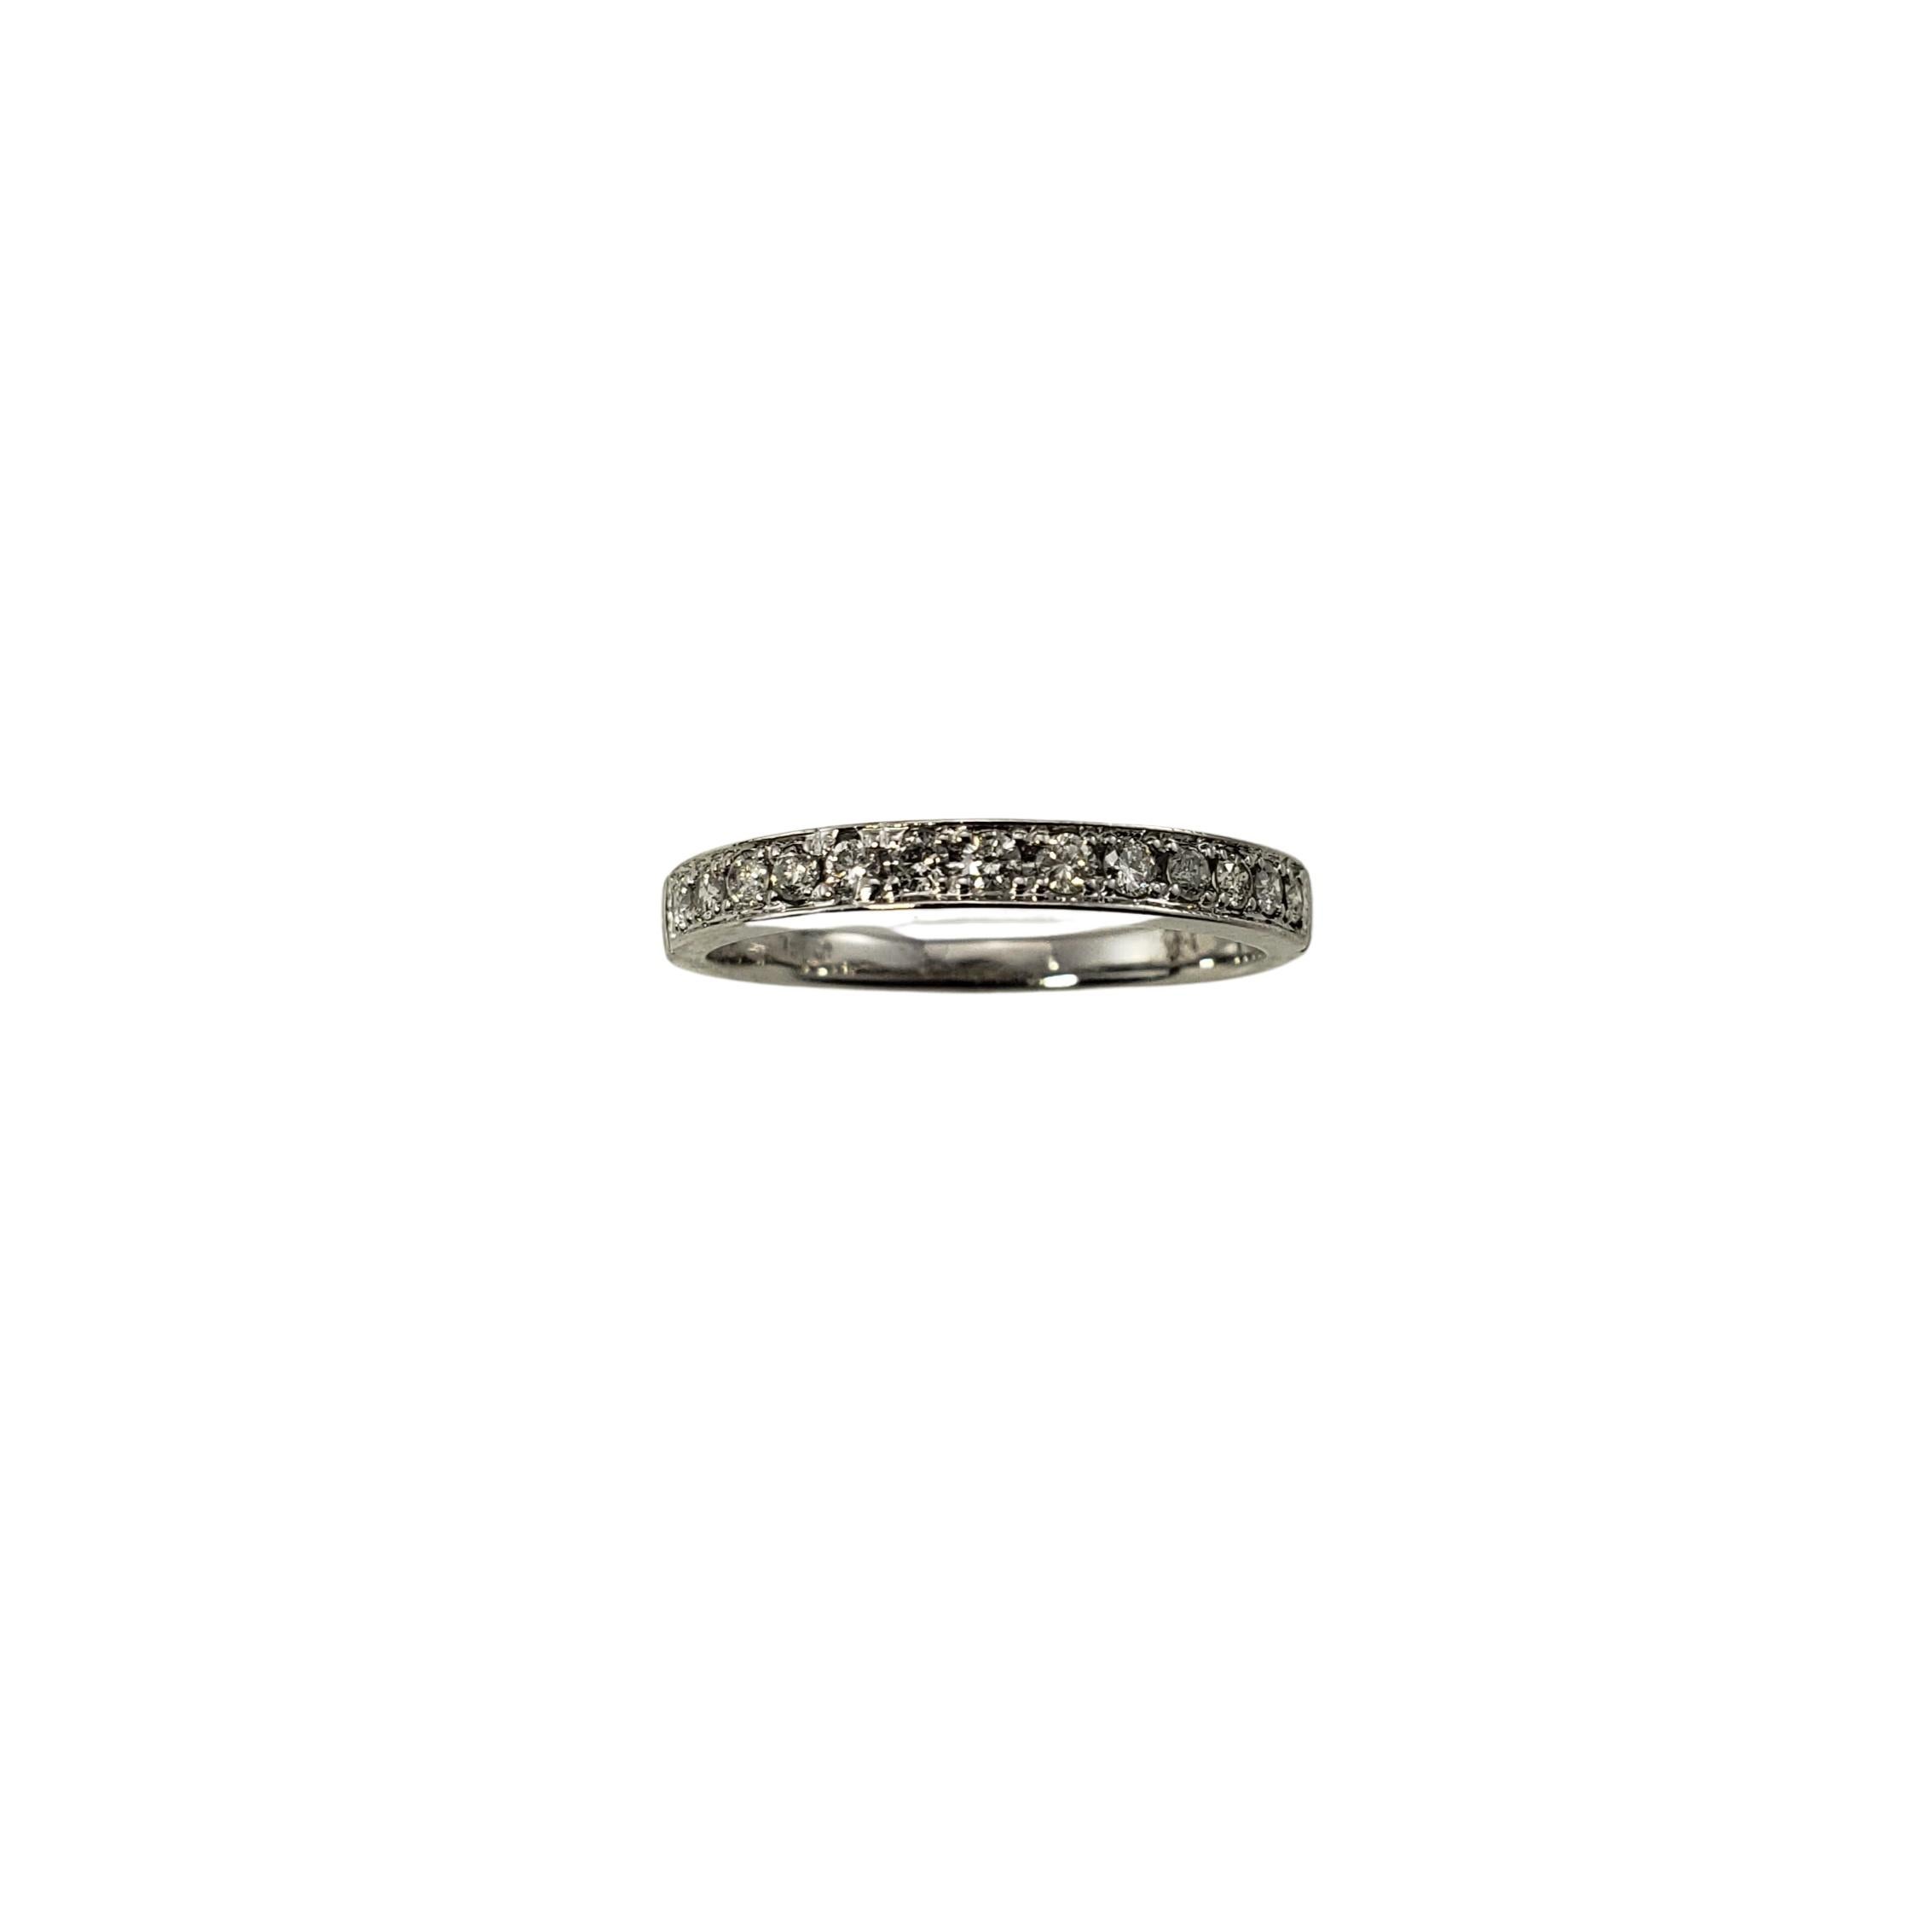 14 Karat White Gold Diamond Wedding Band Ring Size 7.5-

This sparkling band features 13 round brilliant cut diamonds set in classic 14K white gold.  Width:  3 mm.  Shank:  2 mm.

Approximate total diamond weight:  .26 ct.

Diamond color: I

Diamond